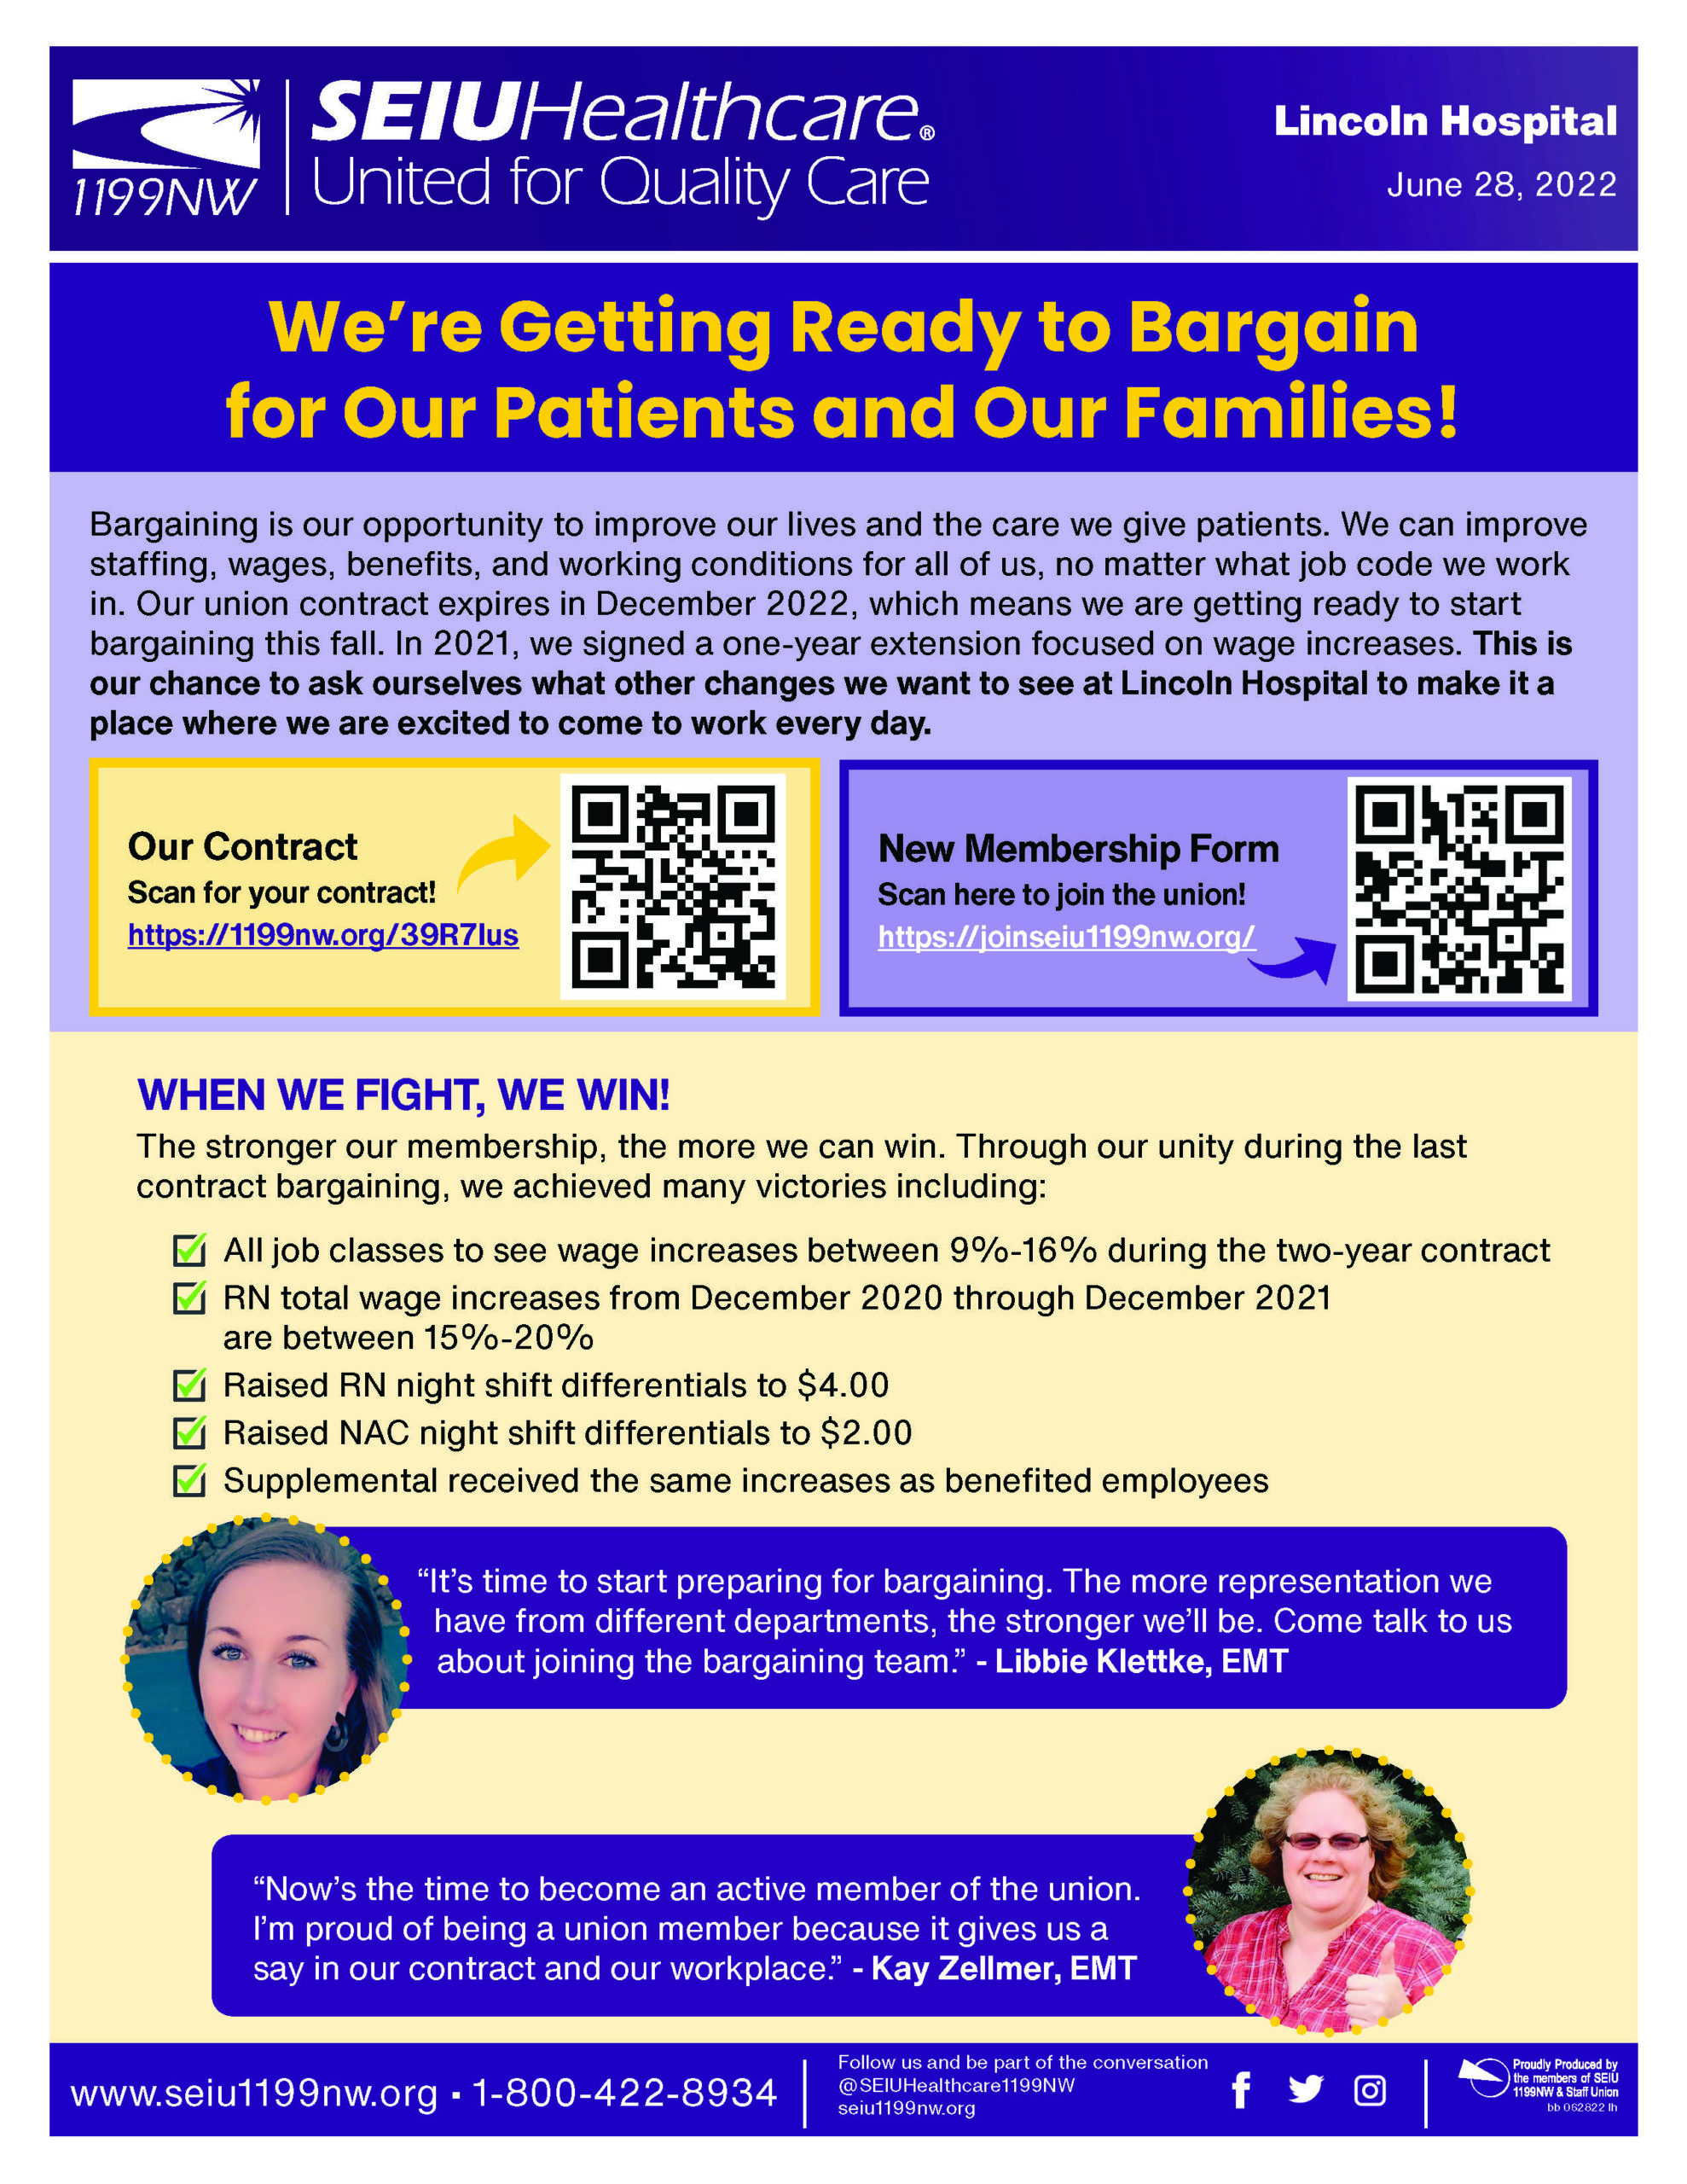 We’re Getting Ready to Bargain for Our Patients and Our Families!